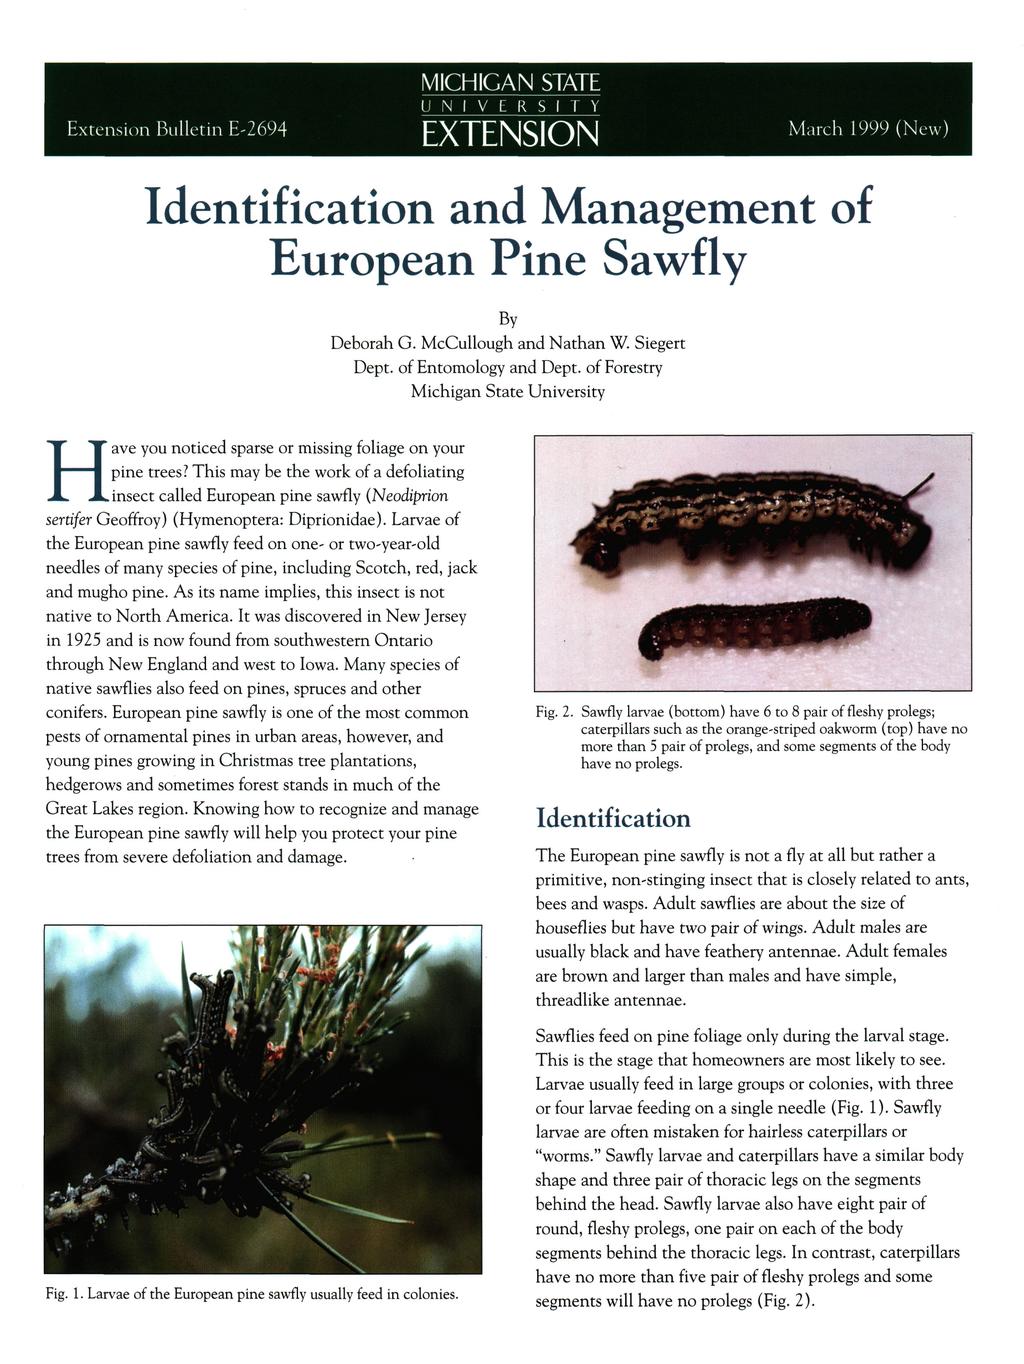 MICHIGAN STATE U N I V E R S I T Y Extension Bulletin E-2694 EXTENSION March 1999 (N. Identification and Management of European Pine Sawfly By Deborah G. McCullough and Nathan W. Siegert Dept.